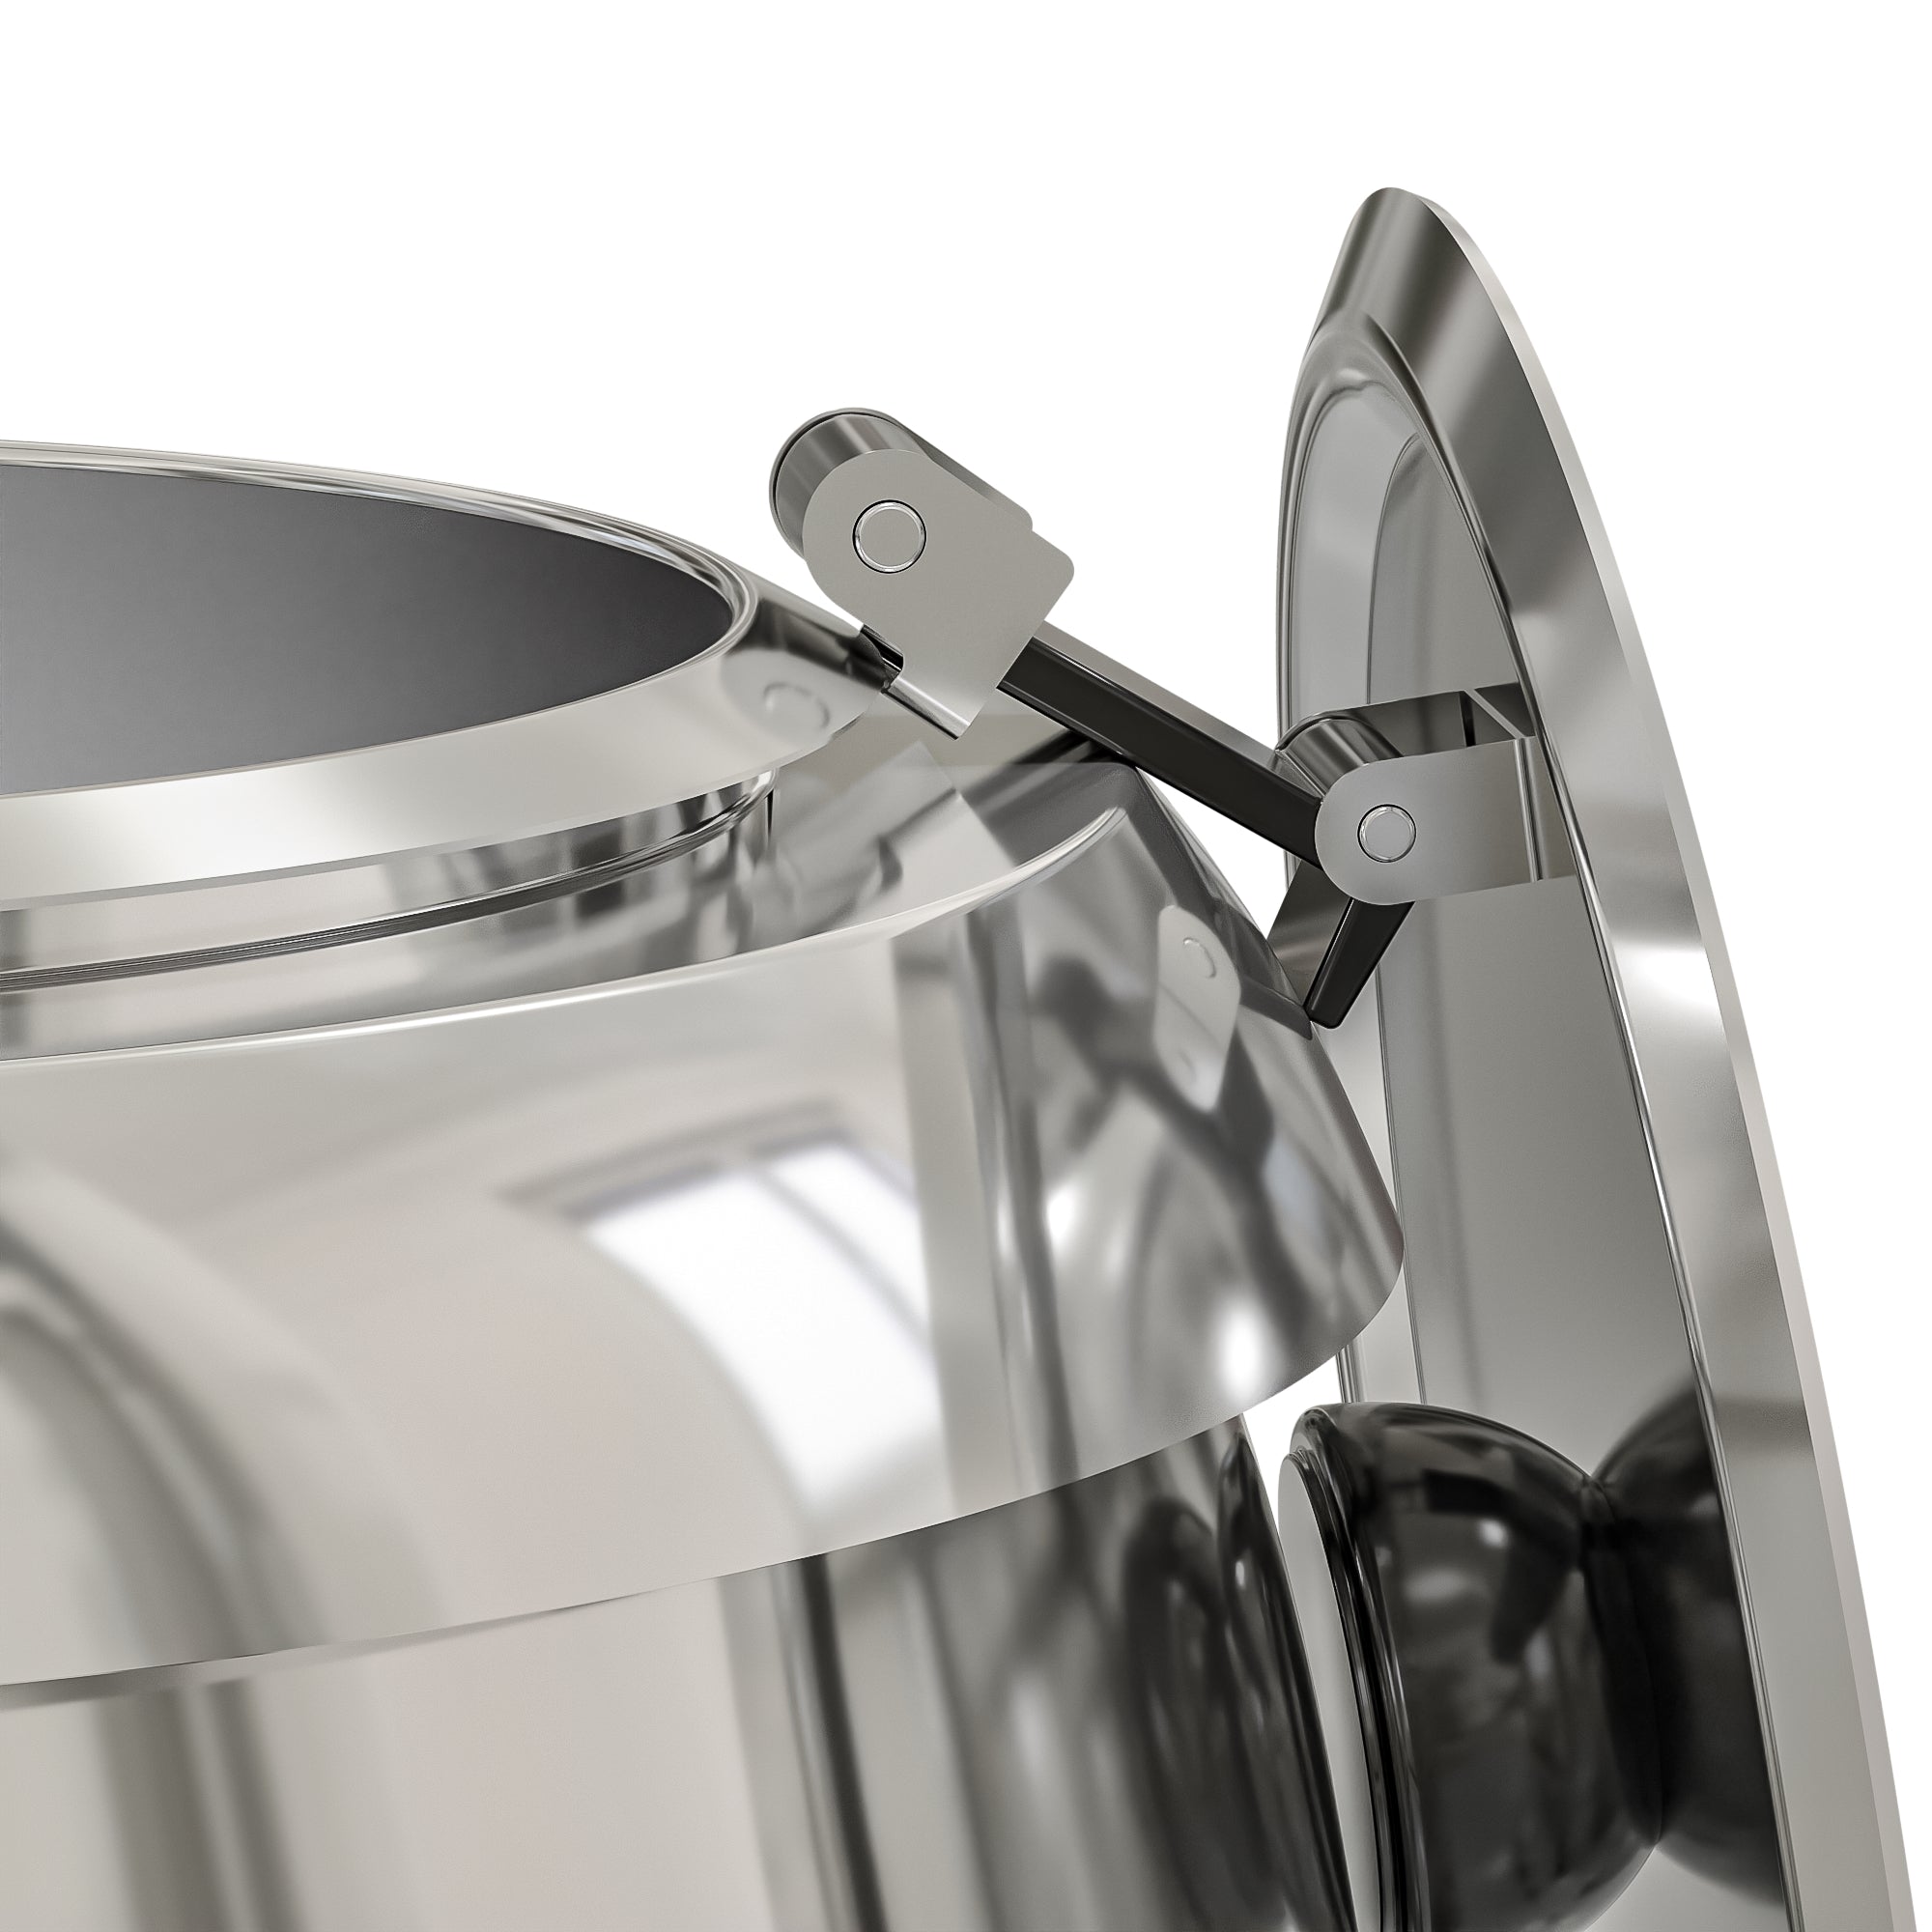 Sentinel 6-Quart Stainless Steel Electric Soup Kettle Warmer